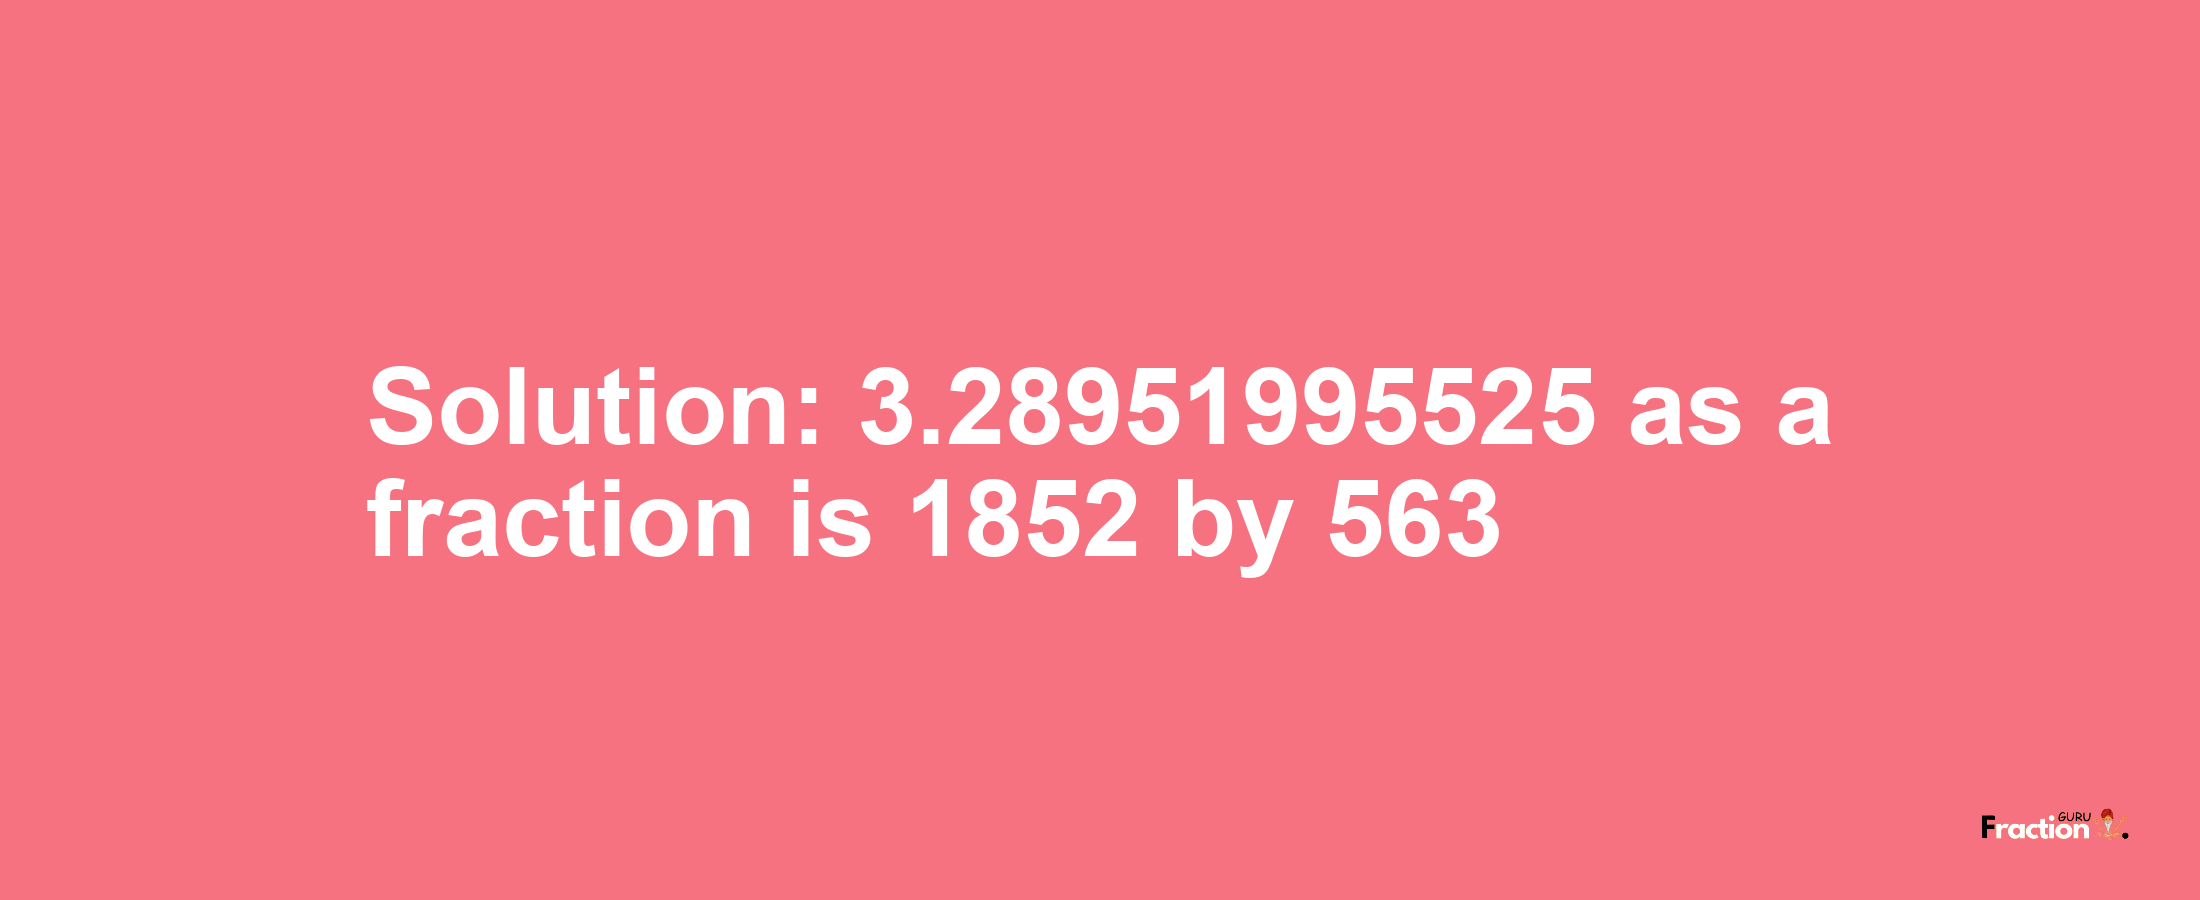 Solution:3.28951995525 as a fraction is 1852/563